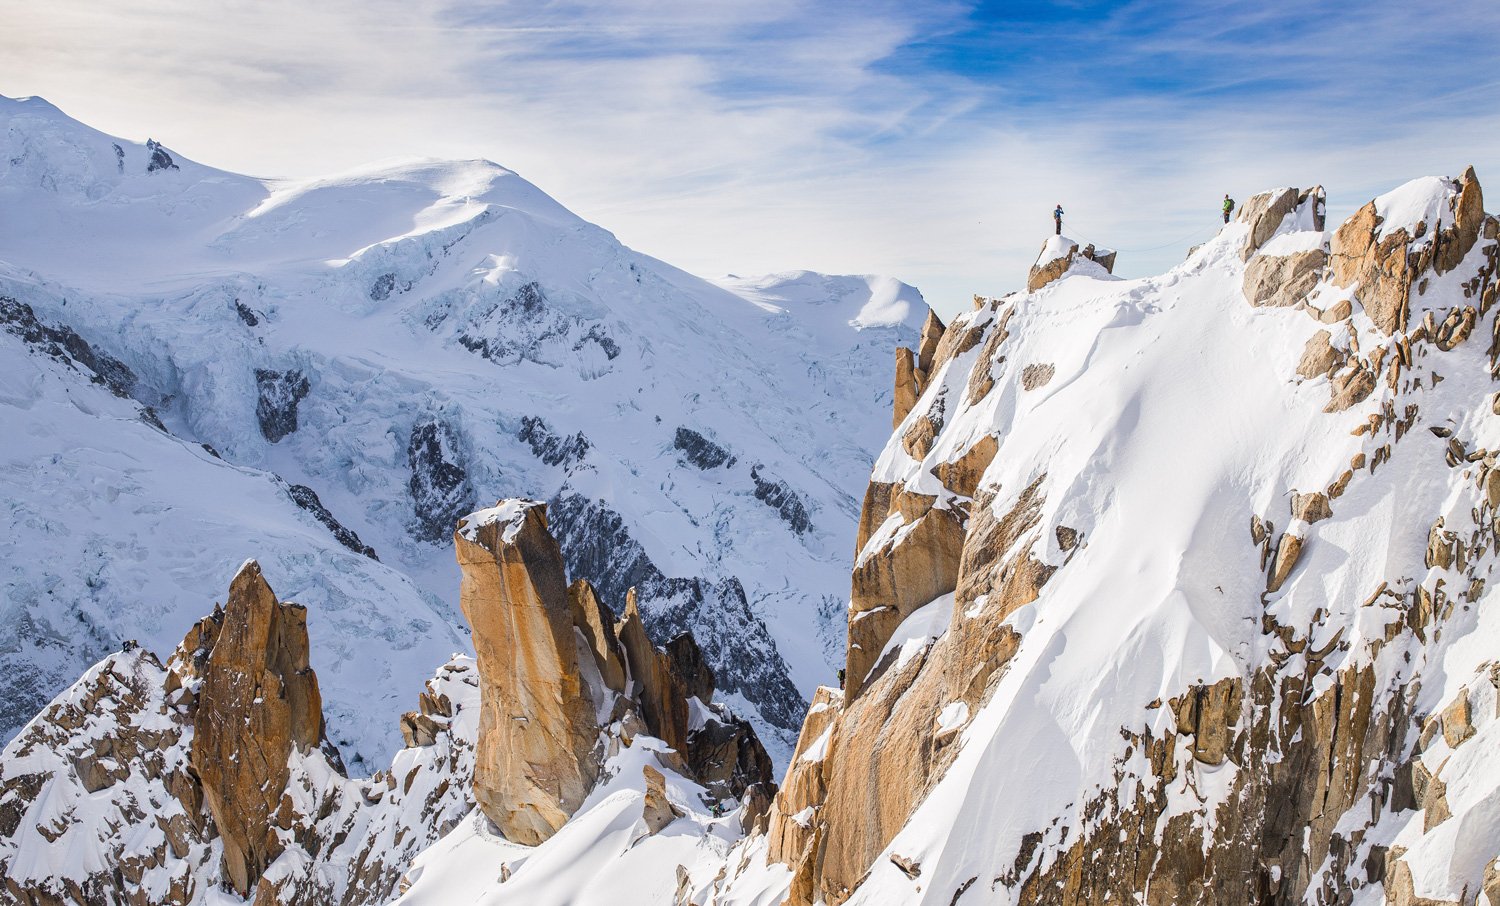 Mountain climbers on top of a snowy mountain | Protecht Risk Management Team Leadership